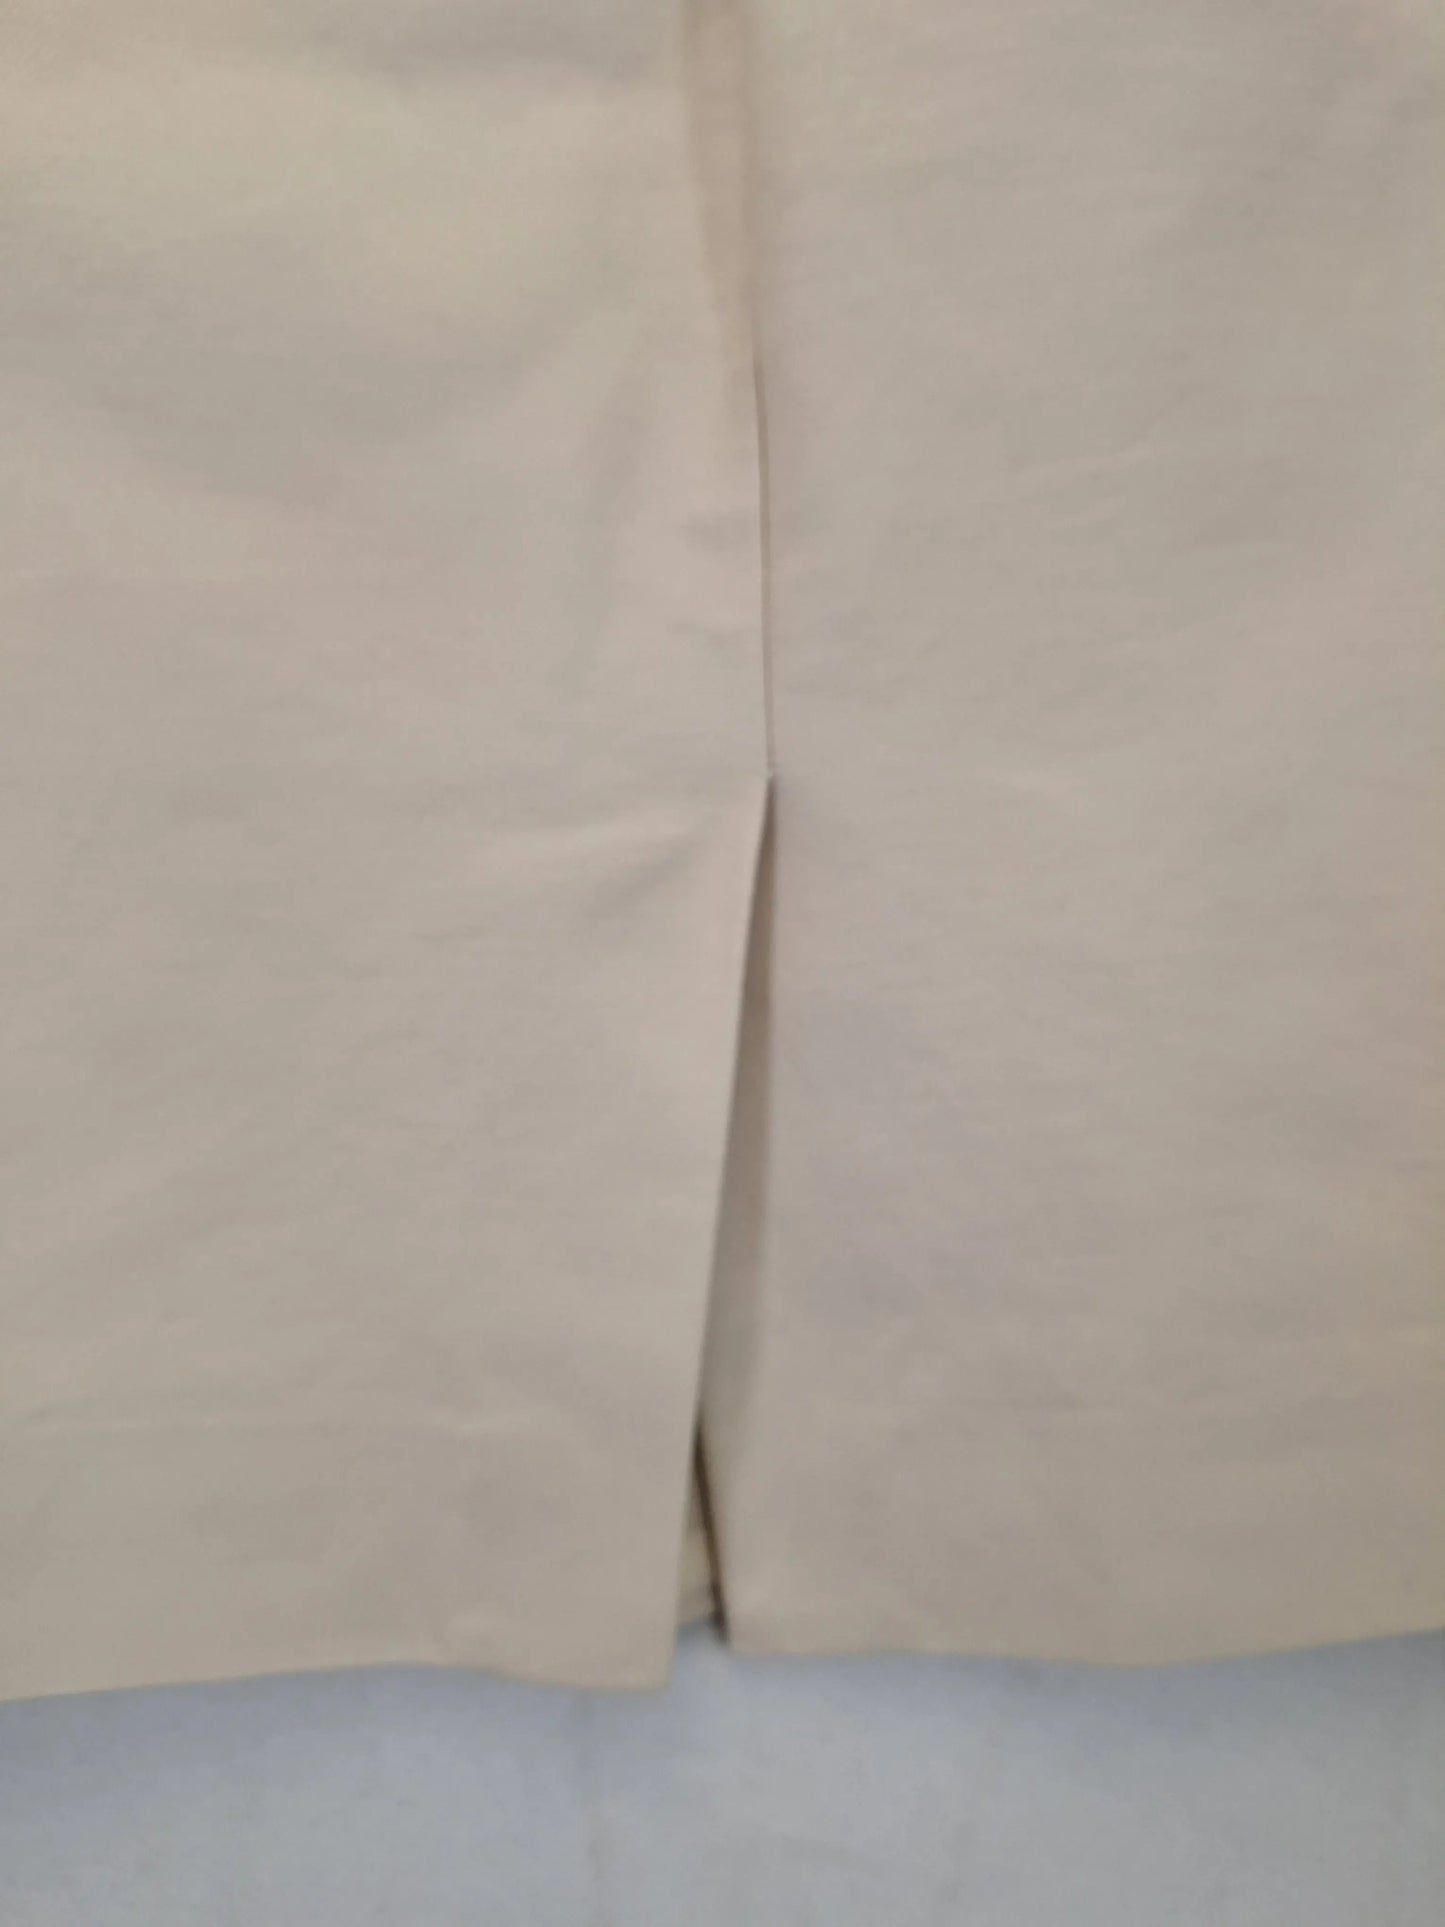 J.Crew Tailored Pencil Mini Skirt Size 8 by SwapUp-Online Second Hand Store-Online Thrift Store